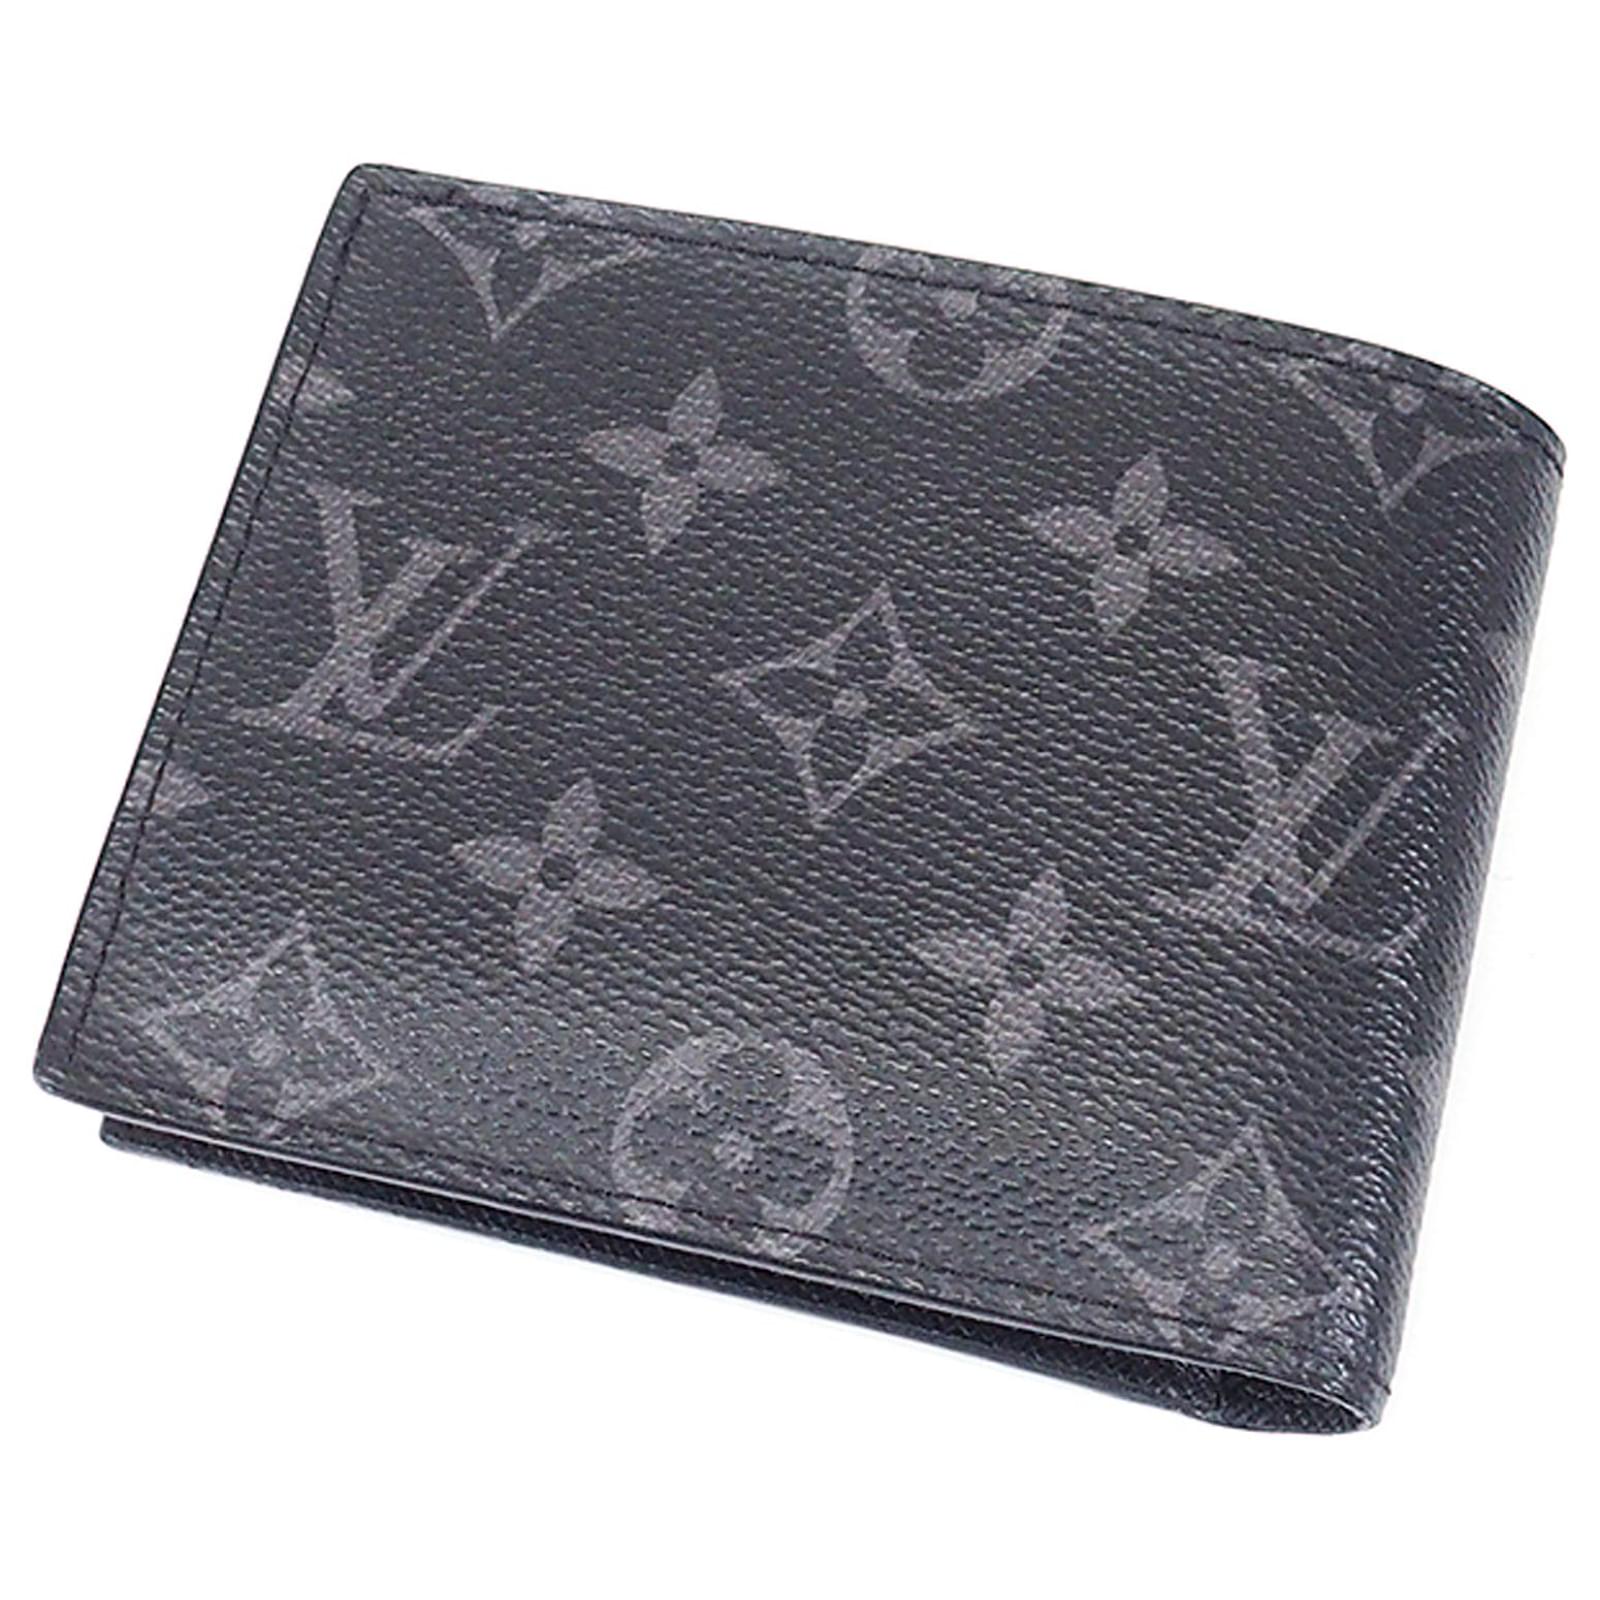 Marco Wallet Monogram Eclipse - Wallets and Small Leather Goods